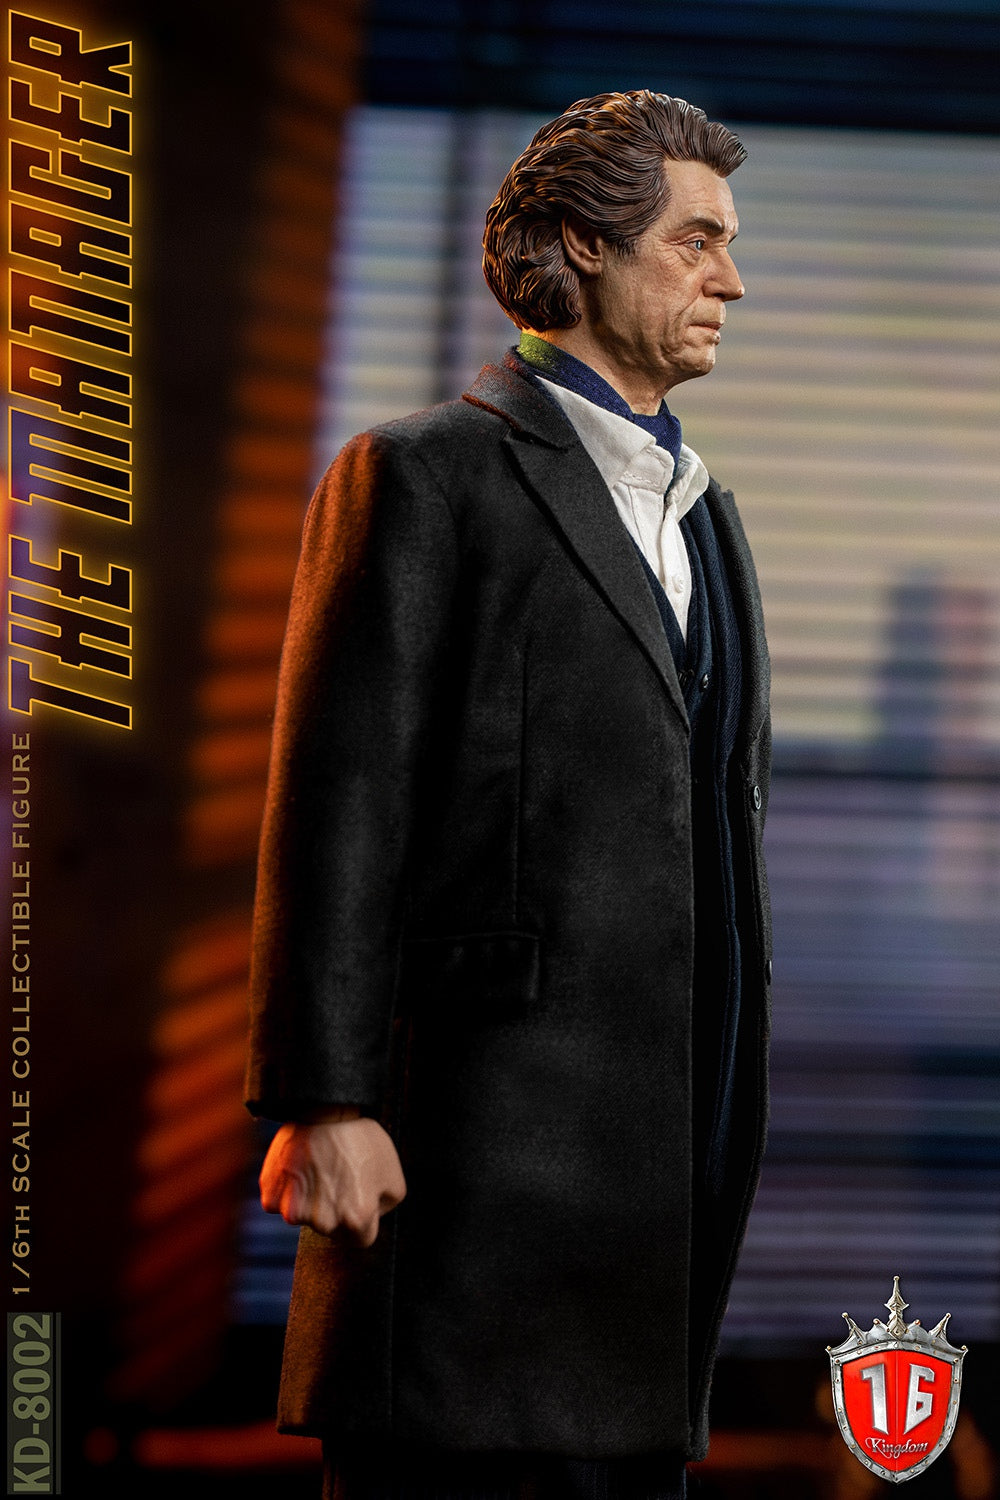 Kingdom - KD-8002 - The Manager (1/6 Scale)